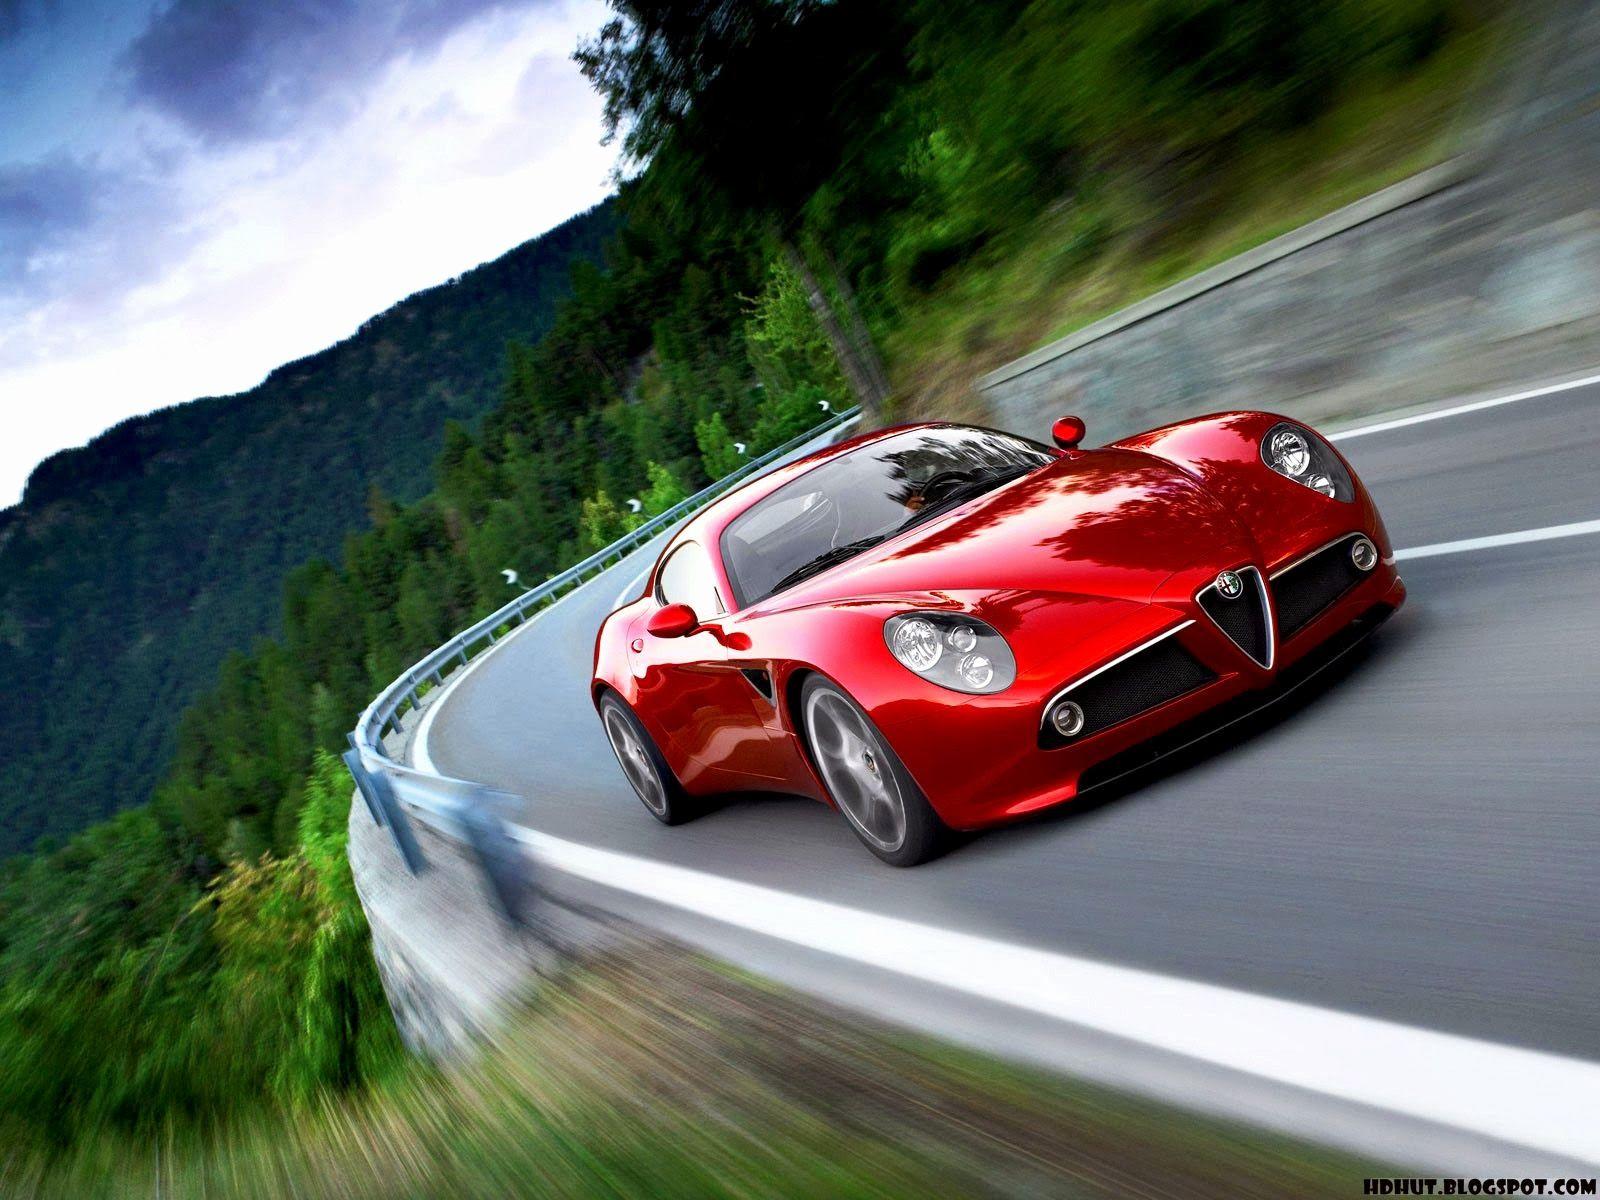 Top Cars Wallpaper Luxury Most Dashing and Amazing Car